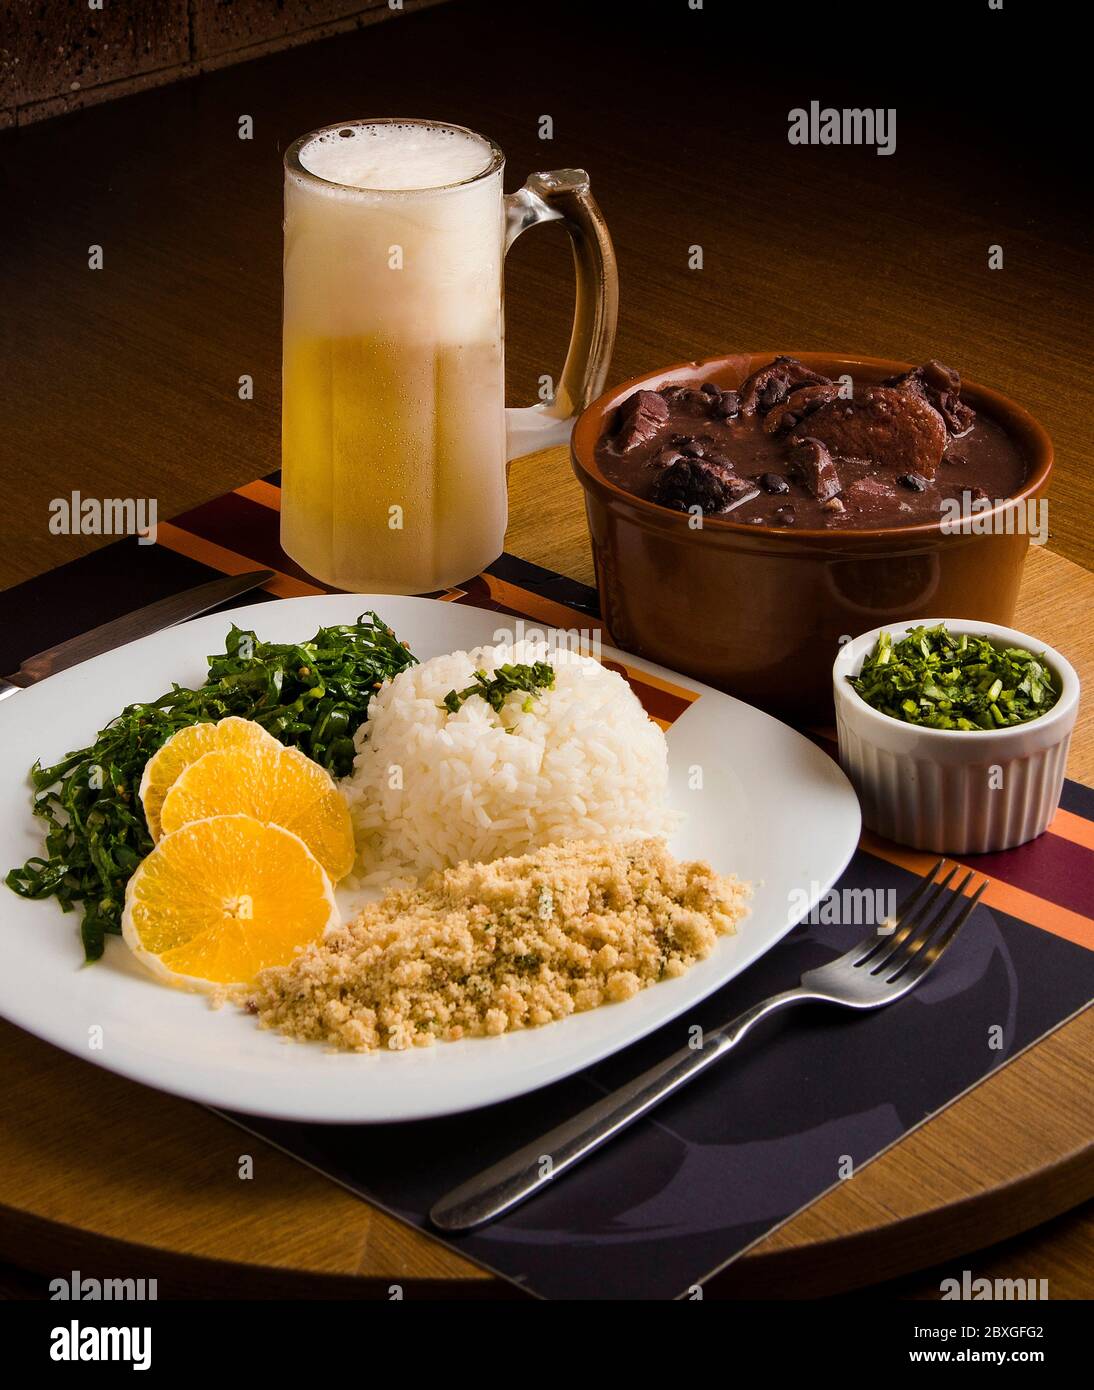 Feijoada stew with farofa, rice, kale and a glass of beer Stock Photo